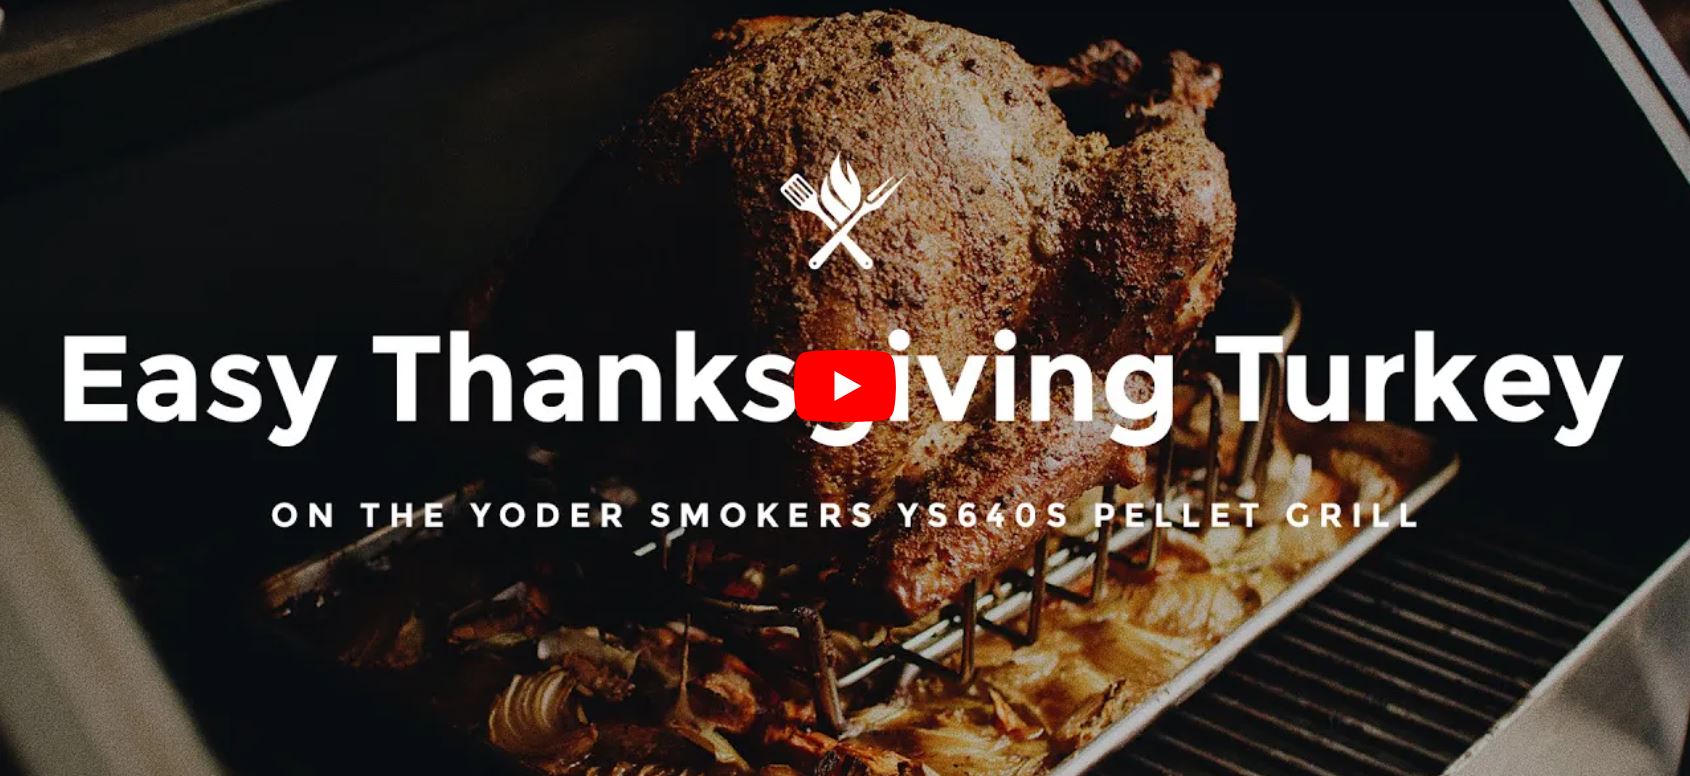 Easy Thanksgiving Turkey on the Yoder Smoker YS640s Pellet Grill